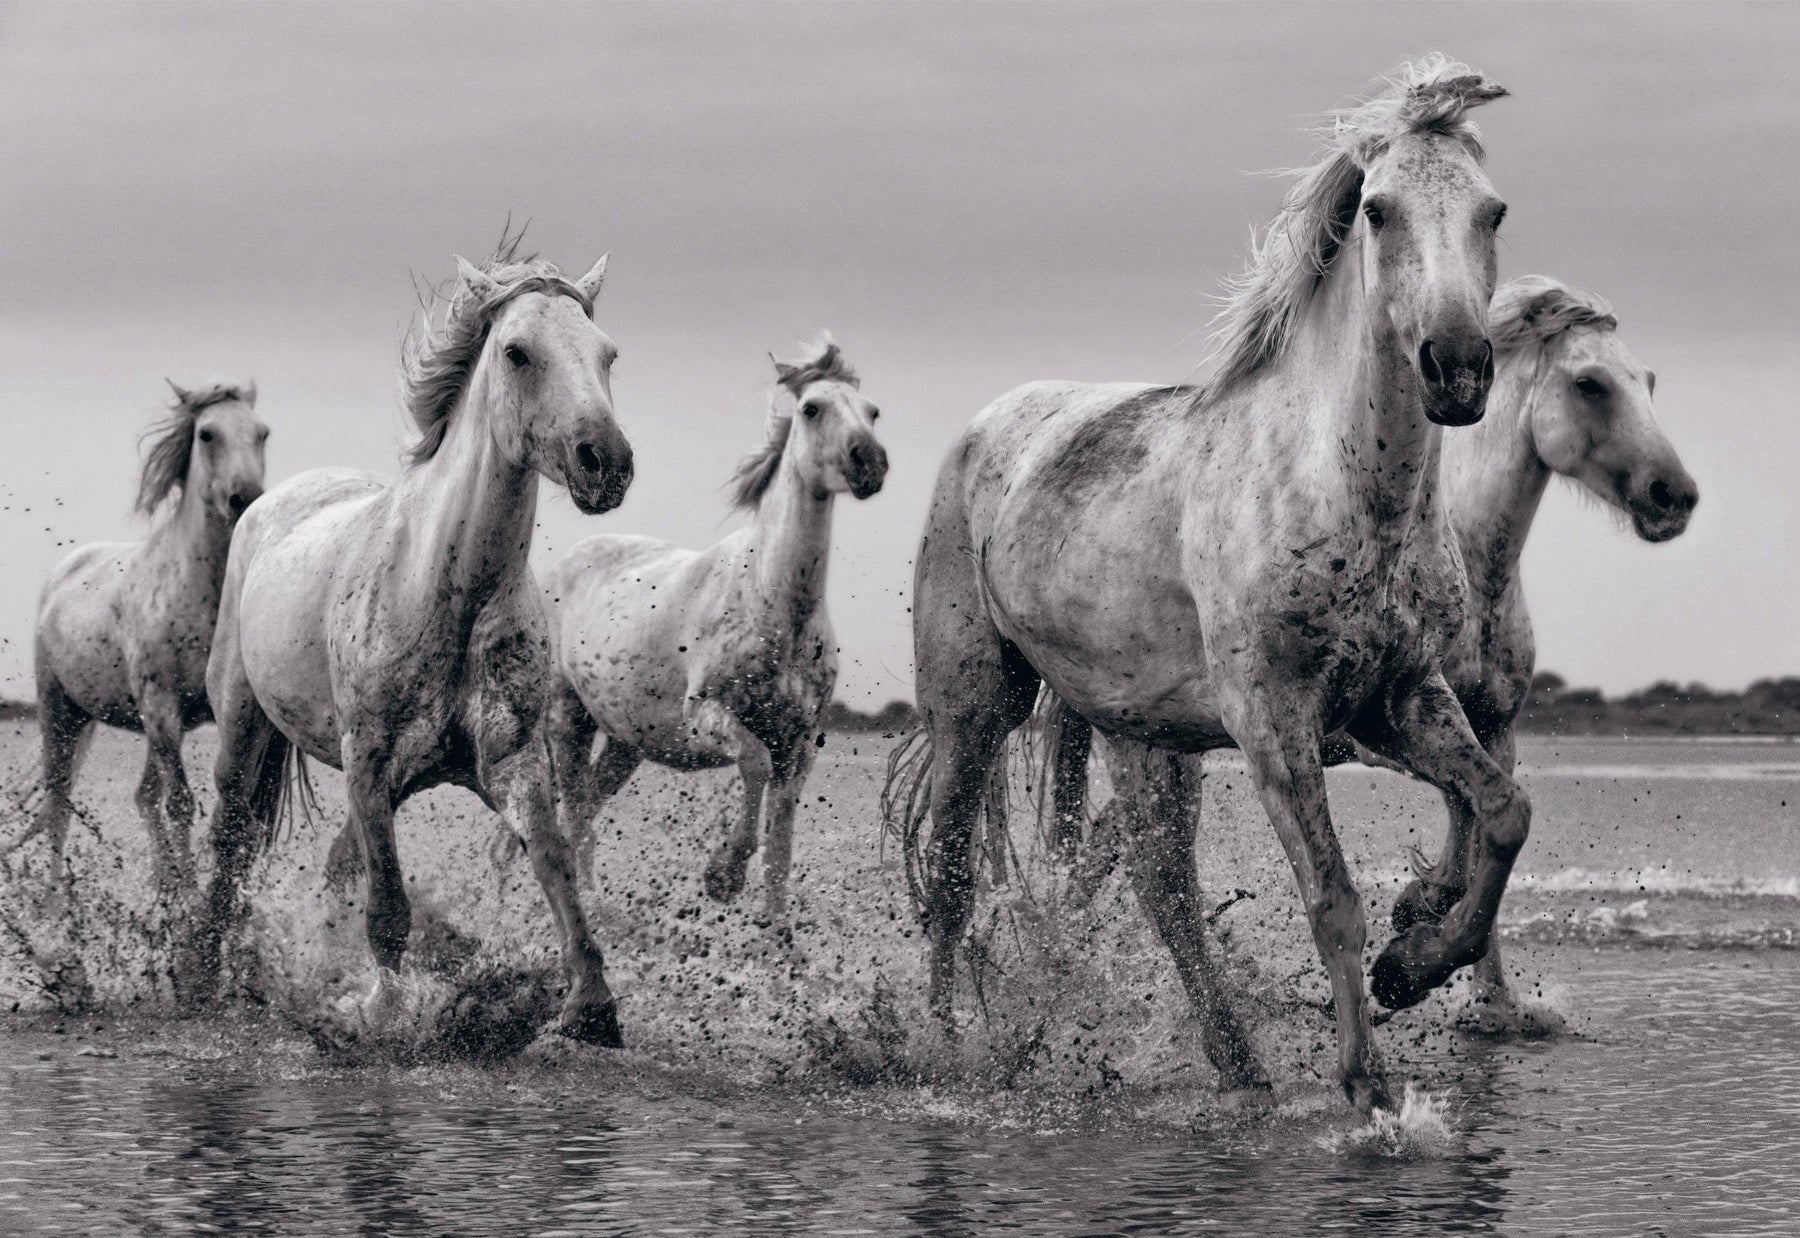 Black and white five white horses running through the shallow waters of Camargue France at dusk